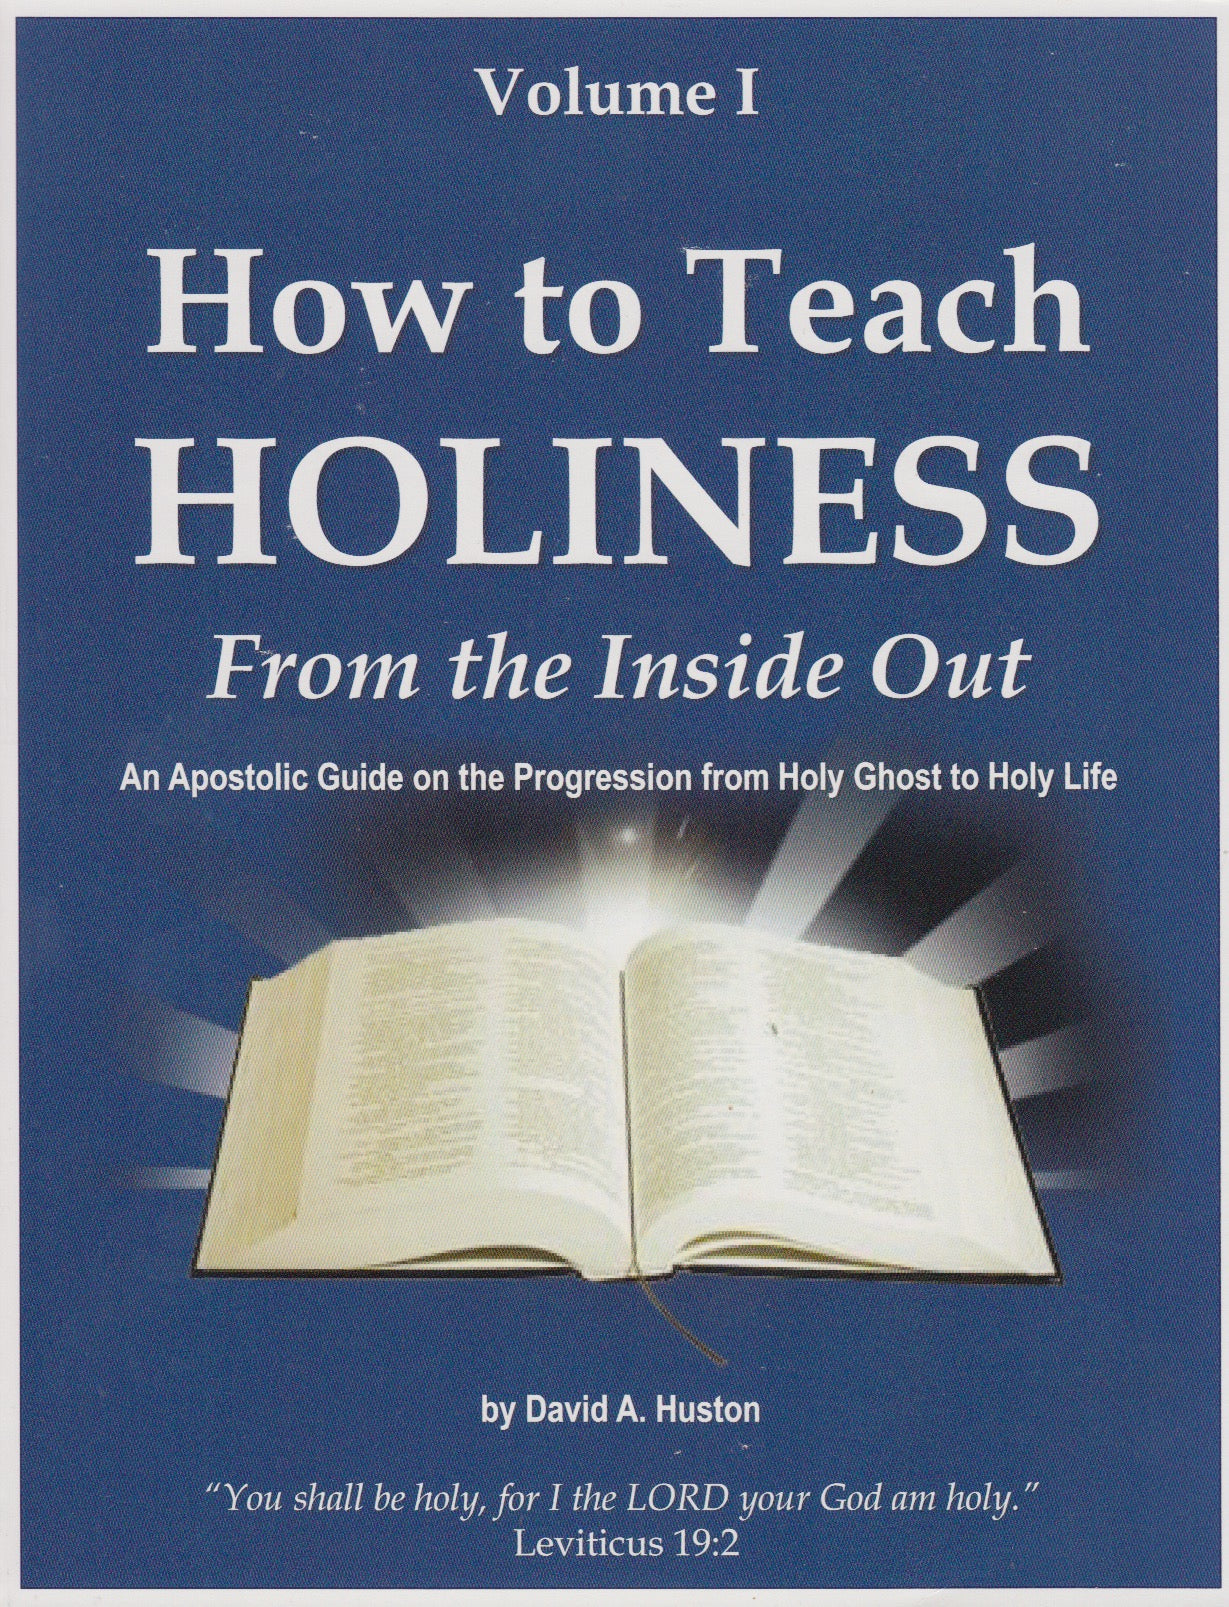 Teach　Out　the　Volume　Publishing　How　From　House　Inside　Pentecostal　to　HOLINESS: